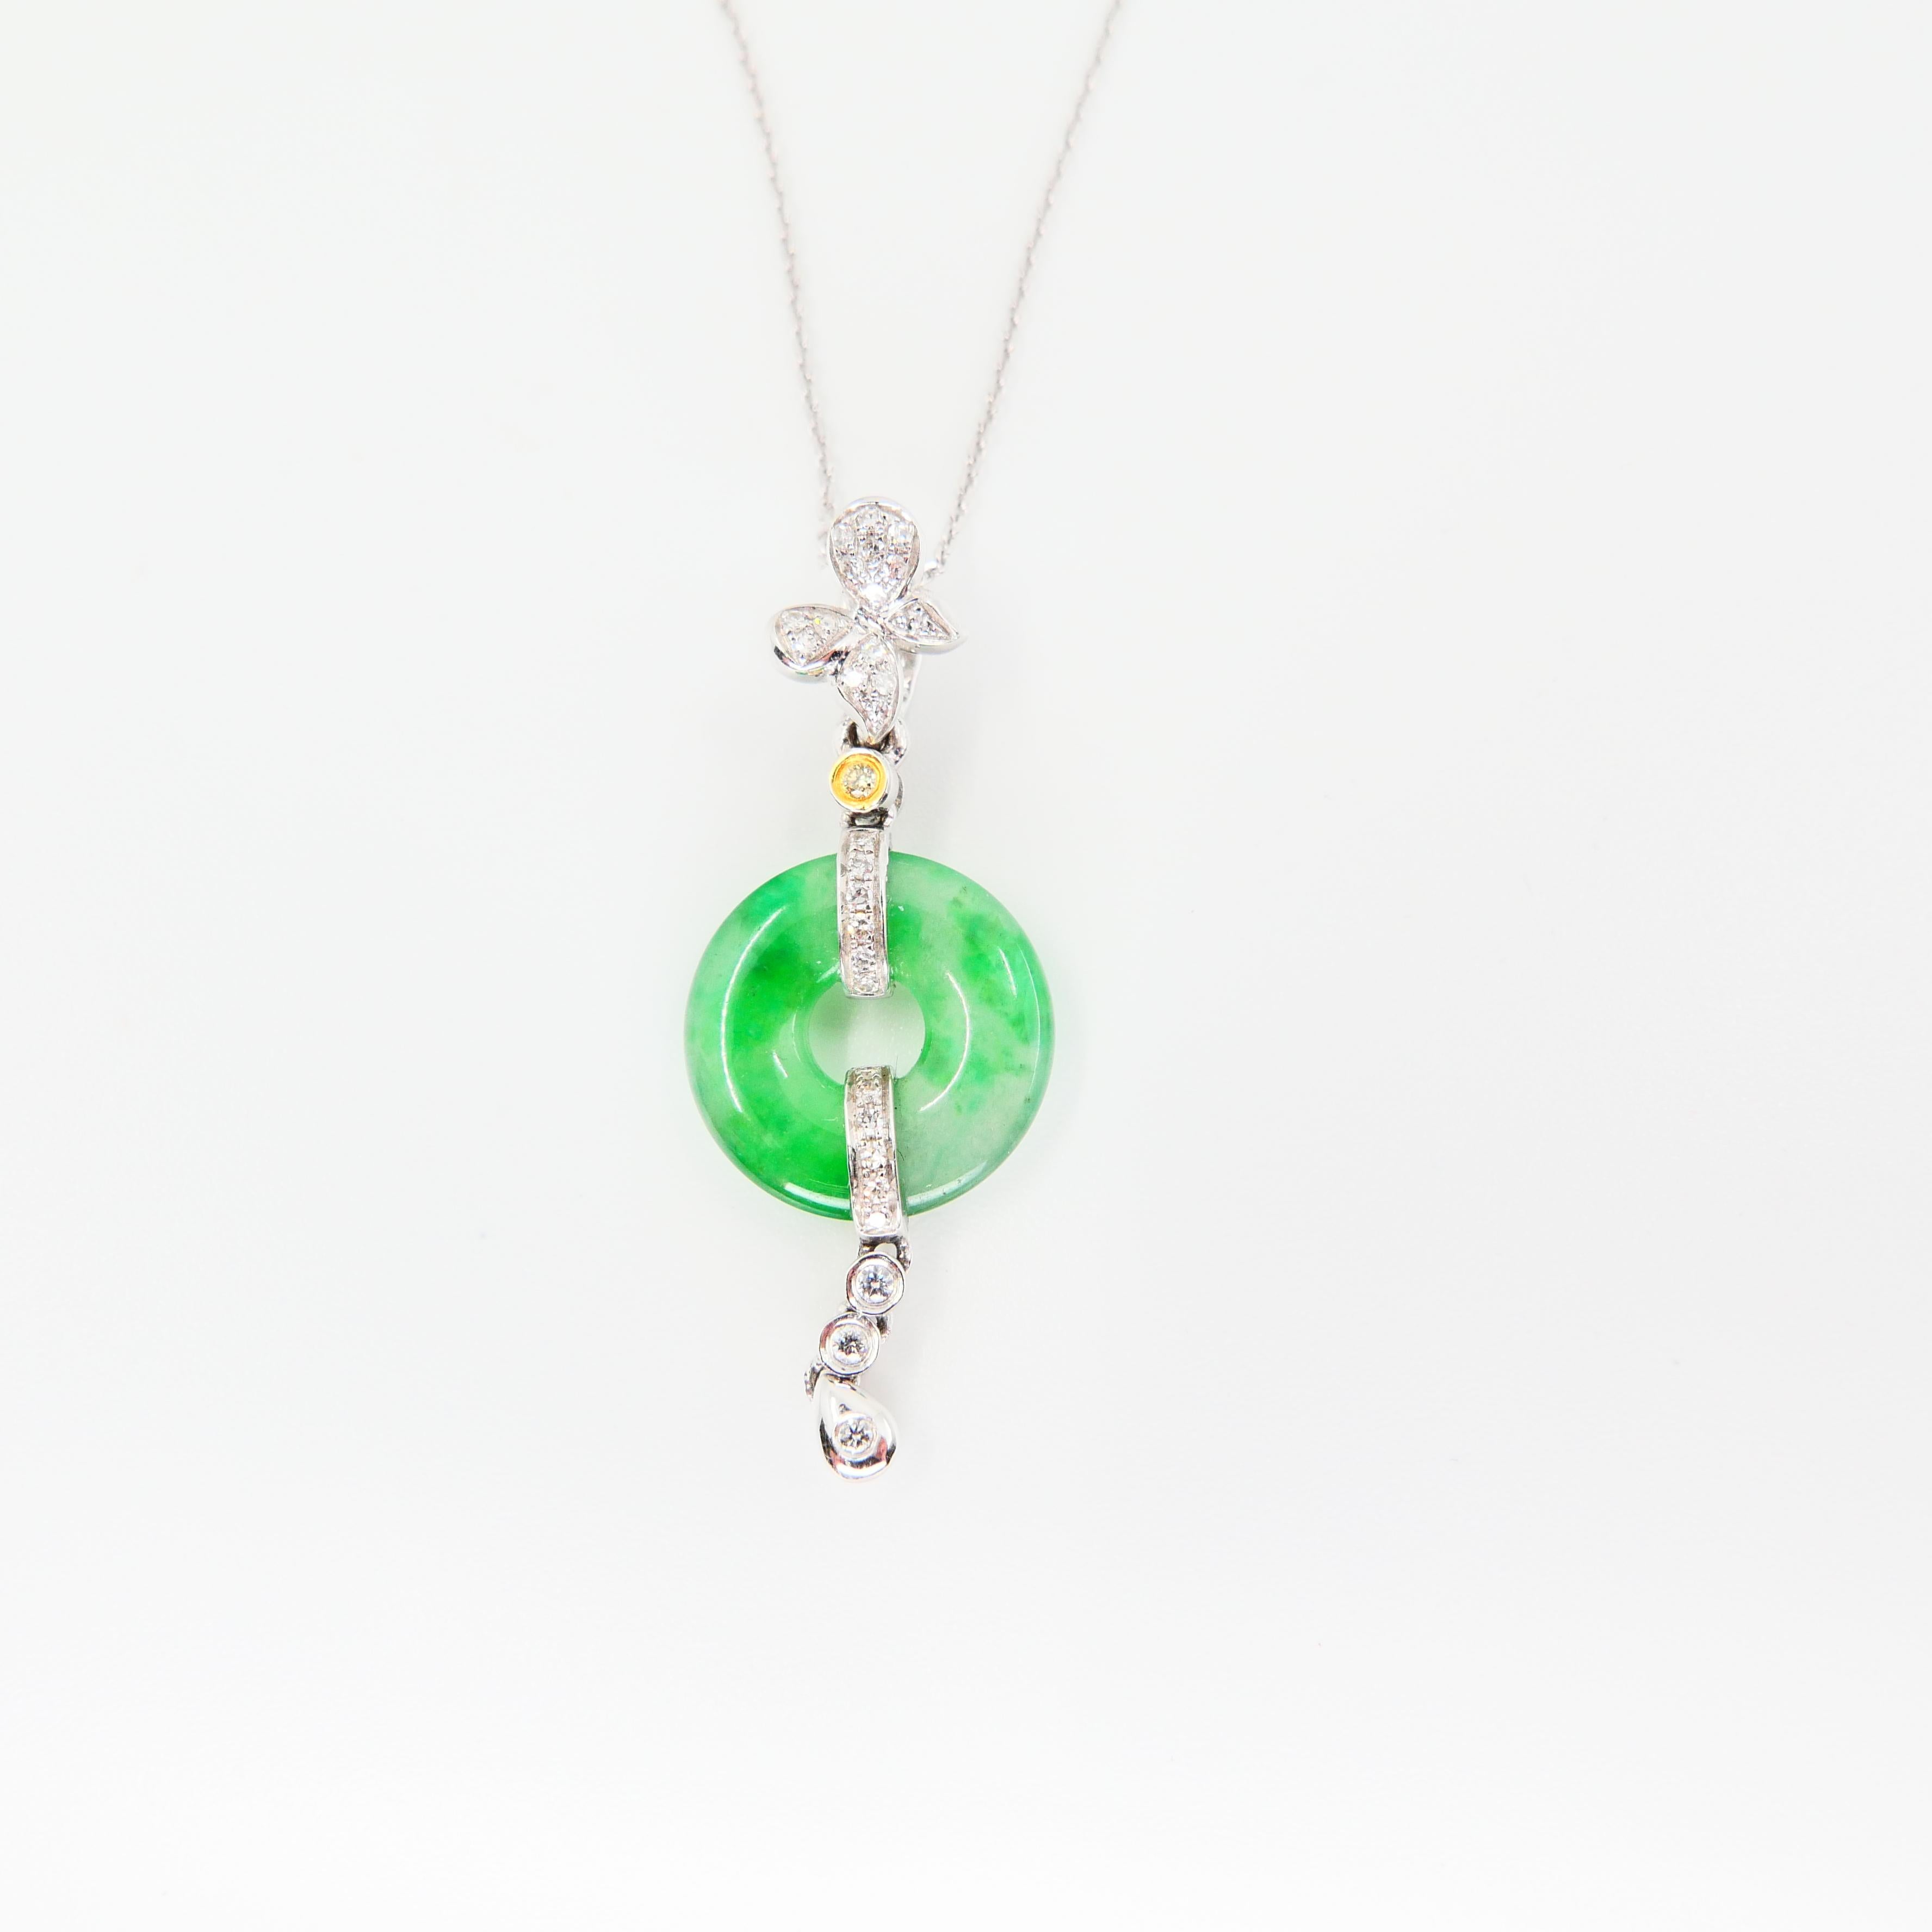 Certified Type A Jadeite Jade Diamond Pendant Drop Necklace, Apple Green Veins In New Condition For Sale In Hong Kong, HK